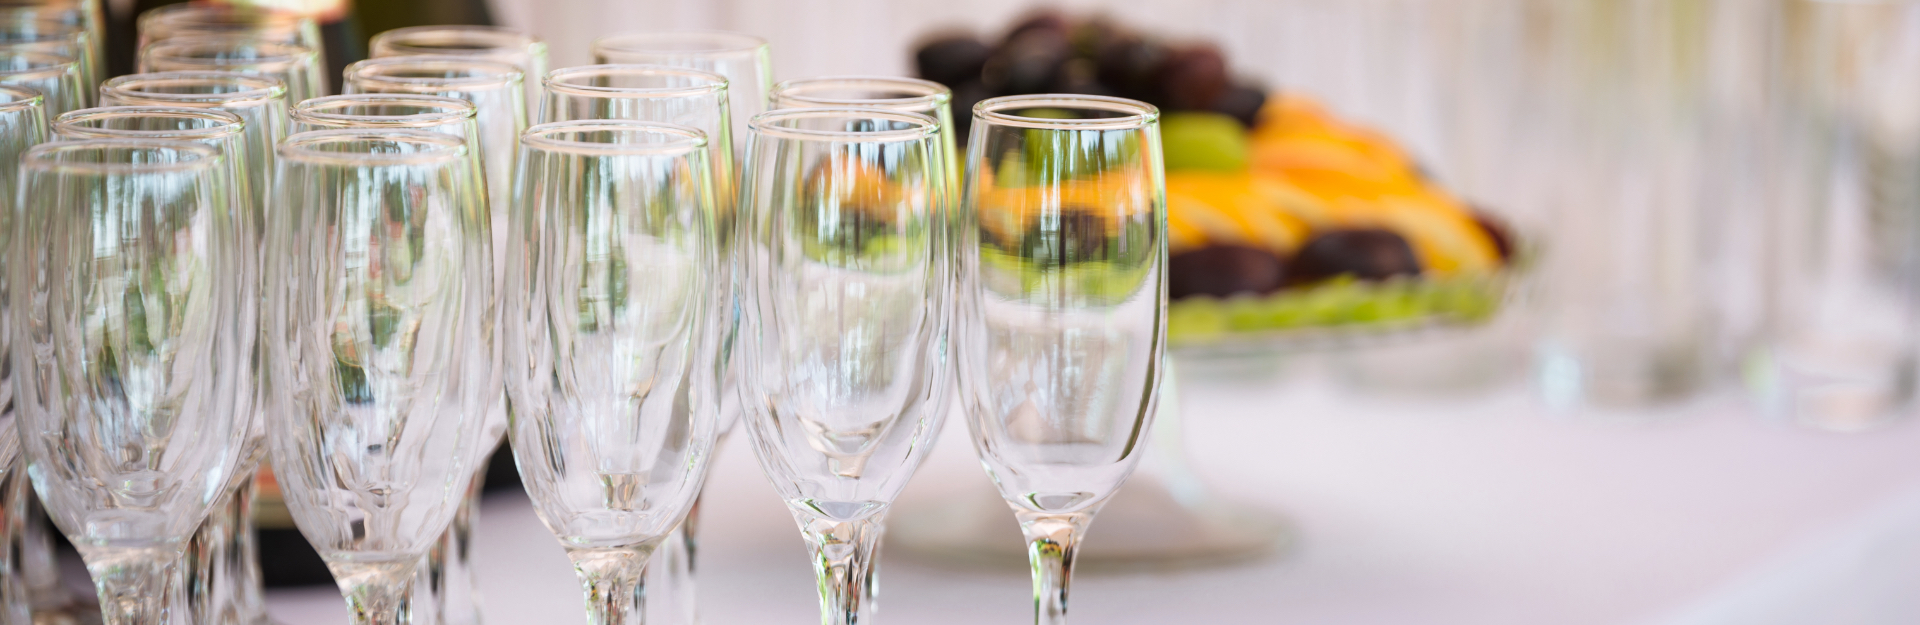 Champagne flute glasses on tabletop